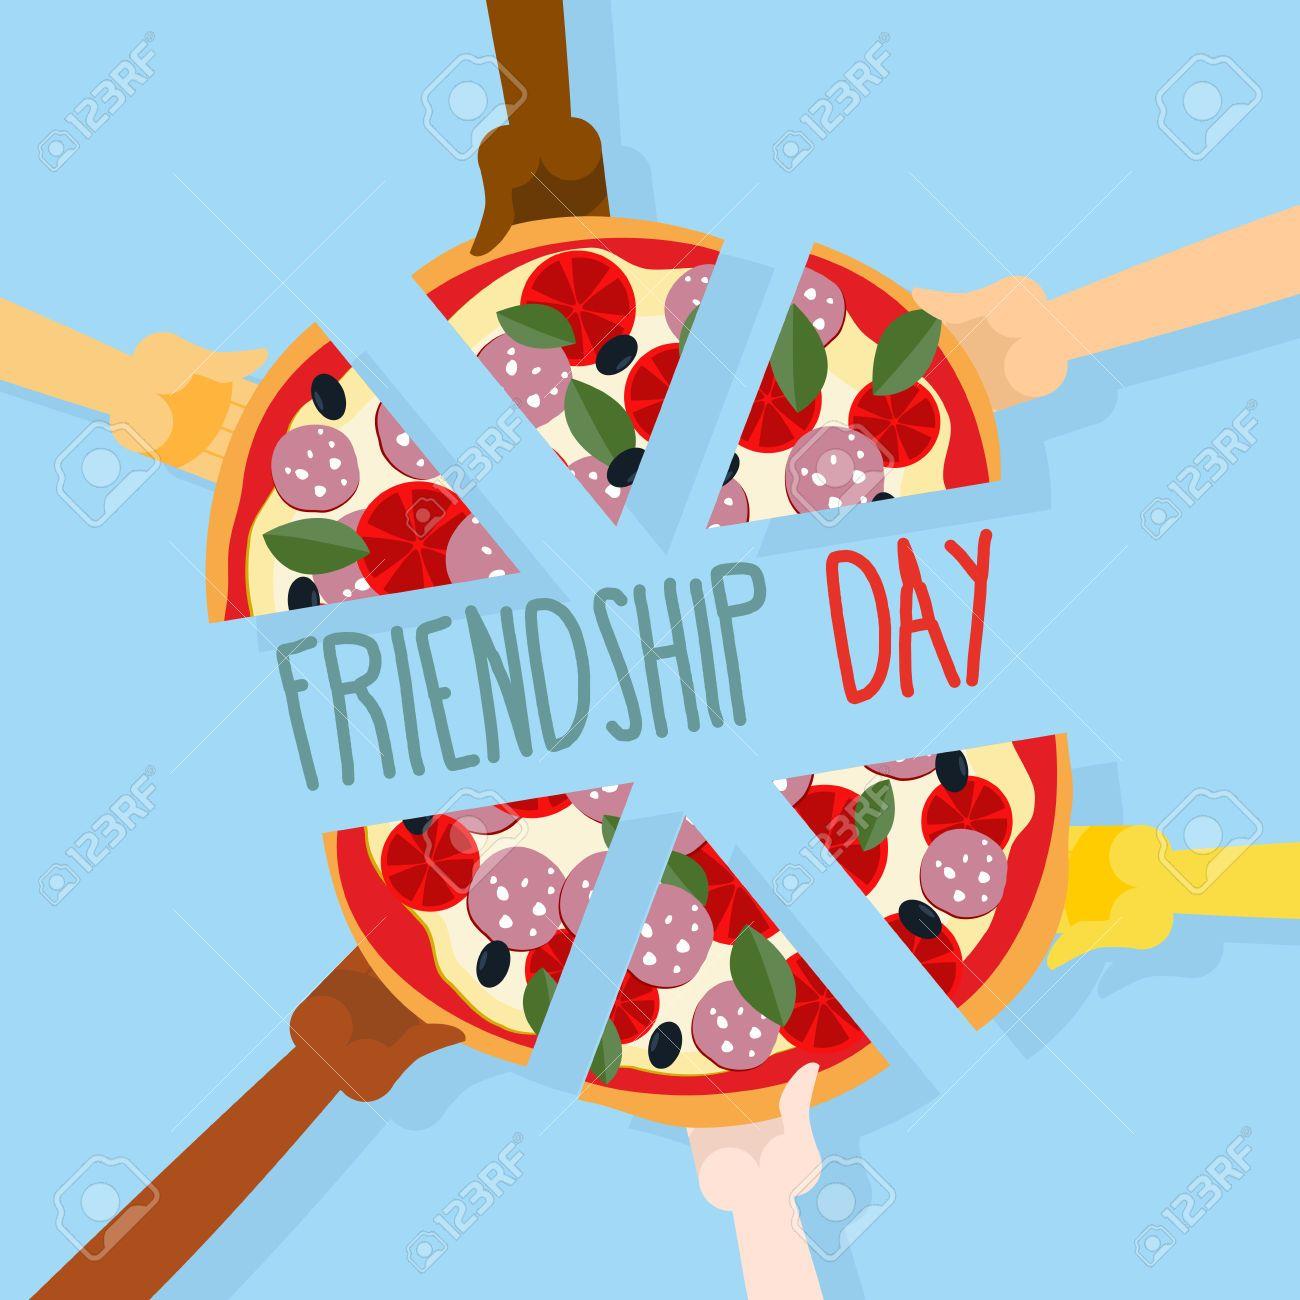 International friendship day. 30 July. Pizza pieces for friends